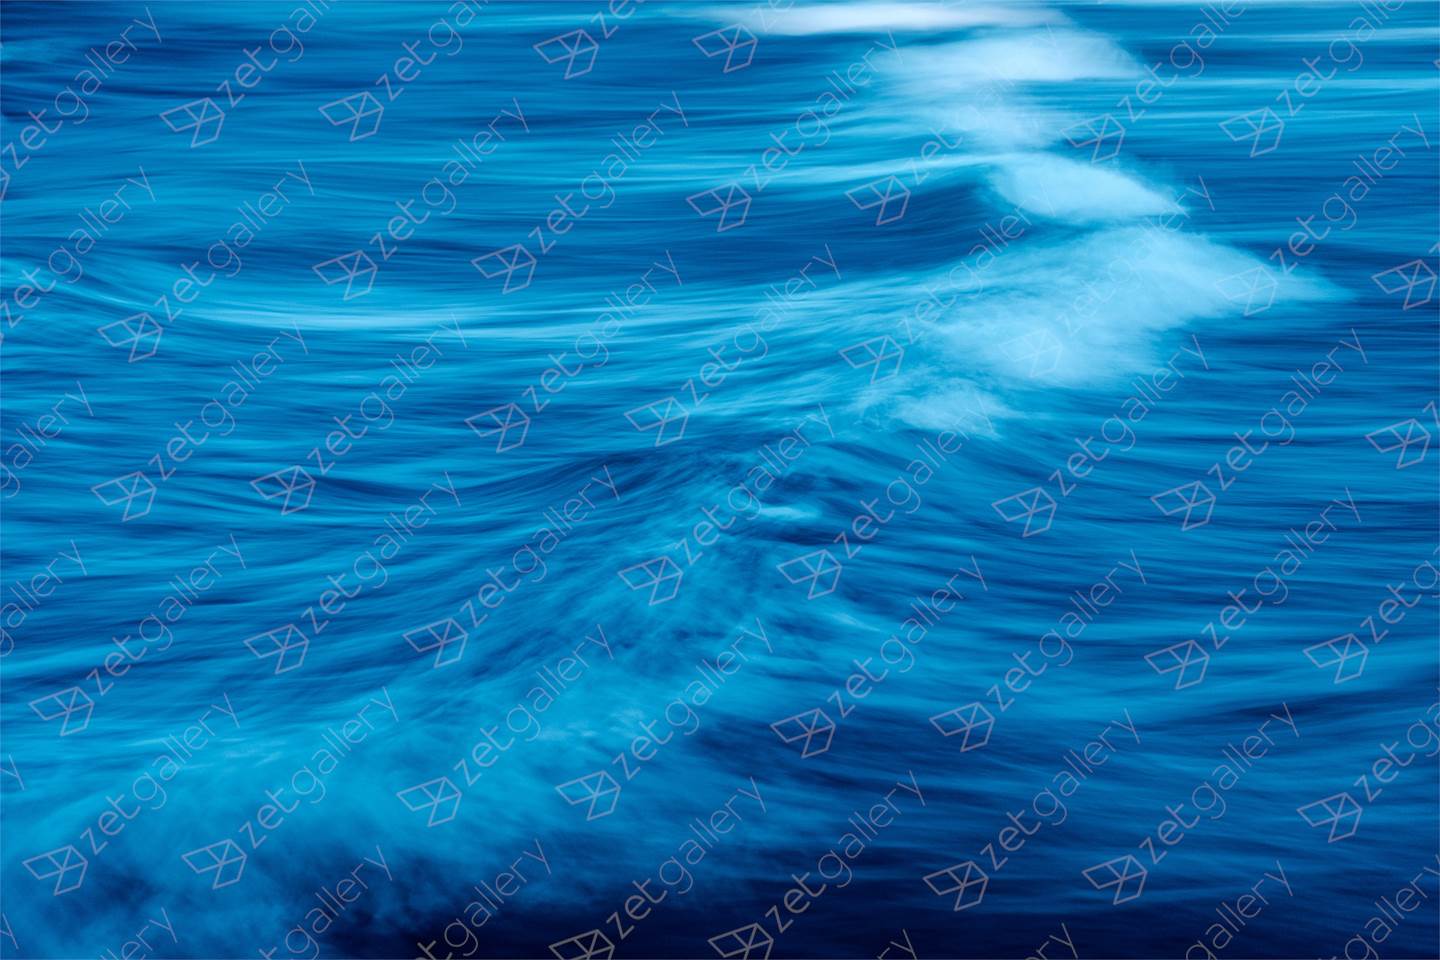 BLUE WAVE, Medium Edition 1 of 10, original Abstract Digital Photography by Benjamin Lurie